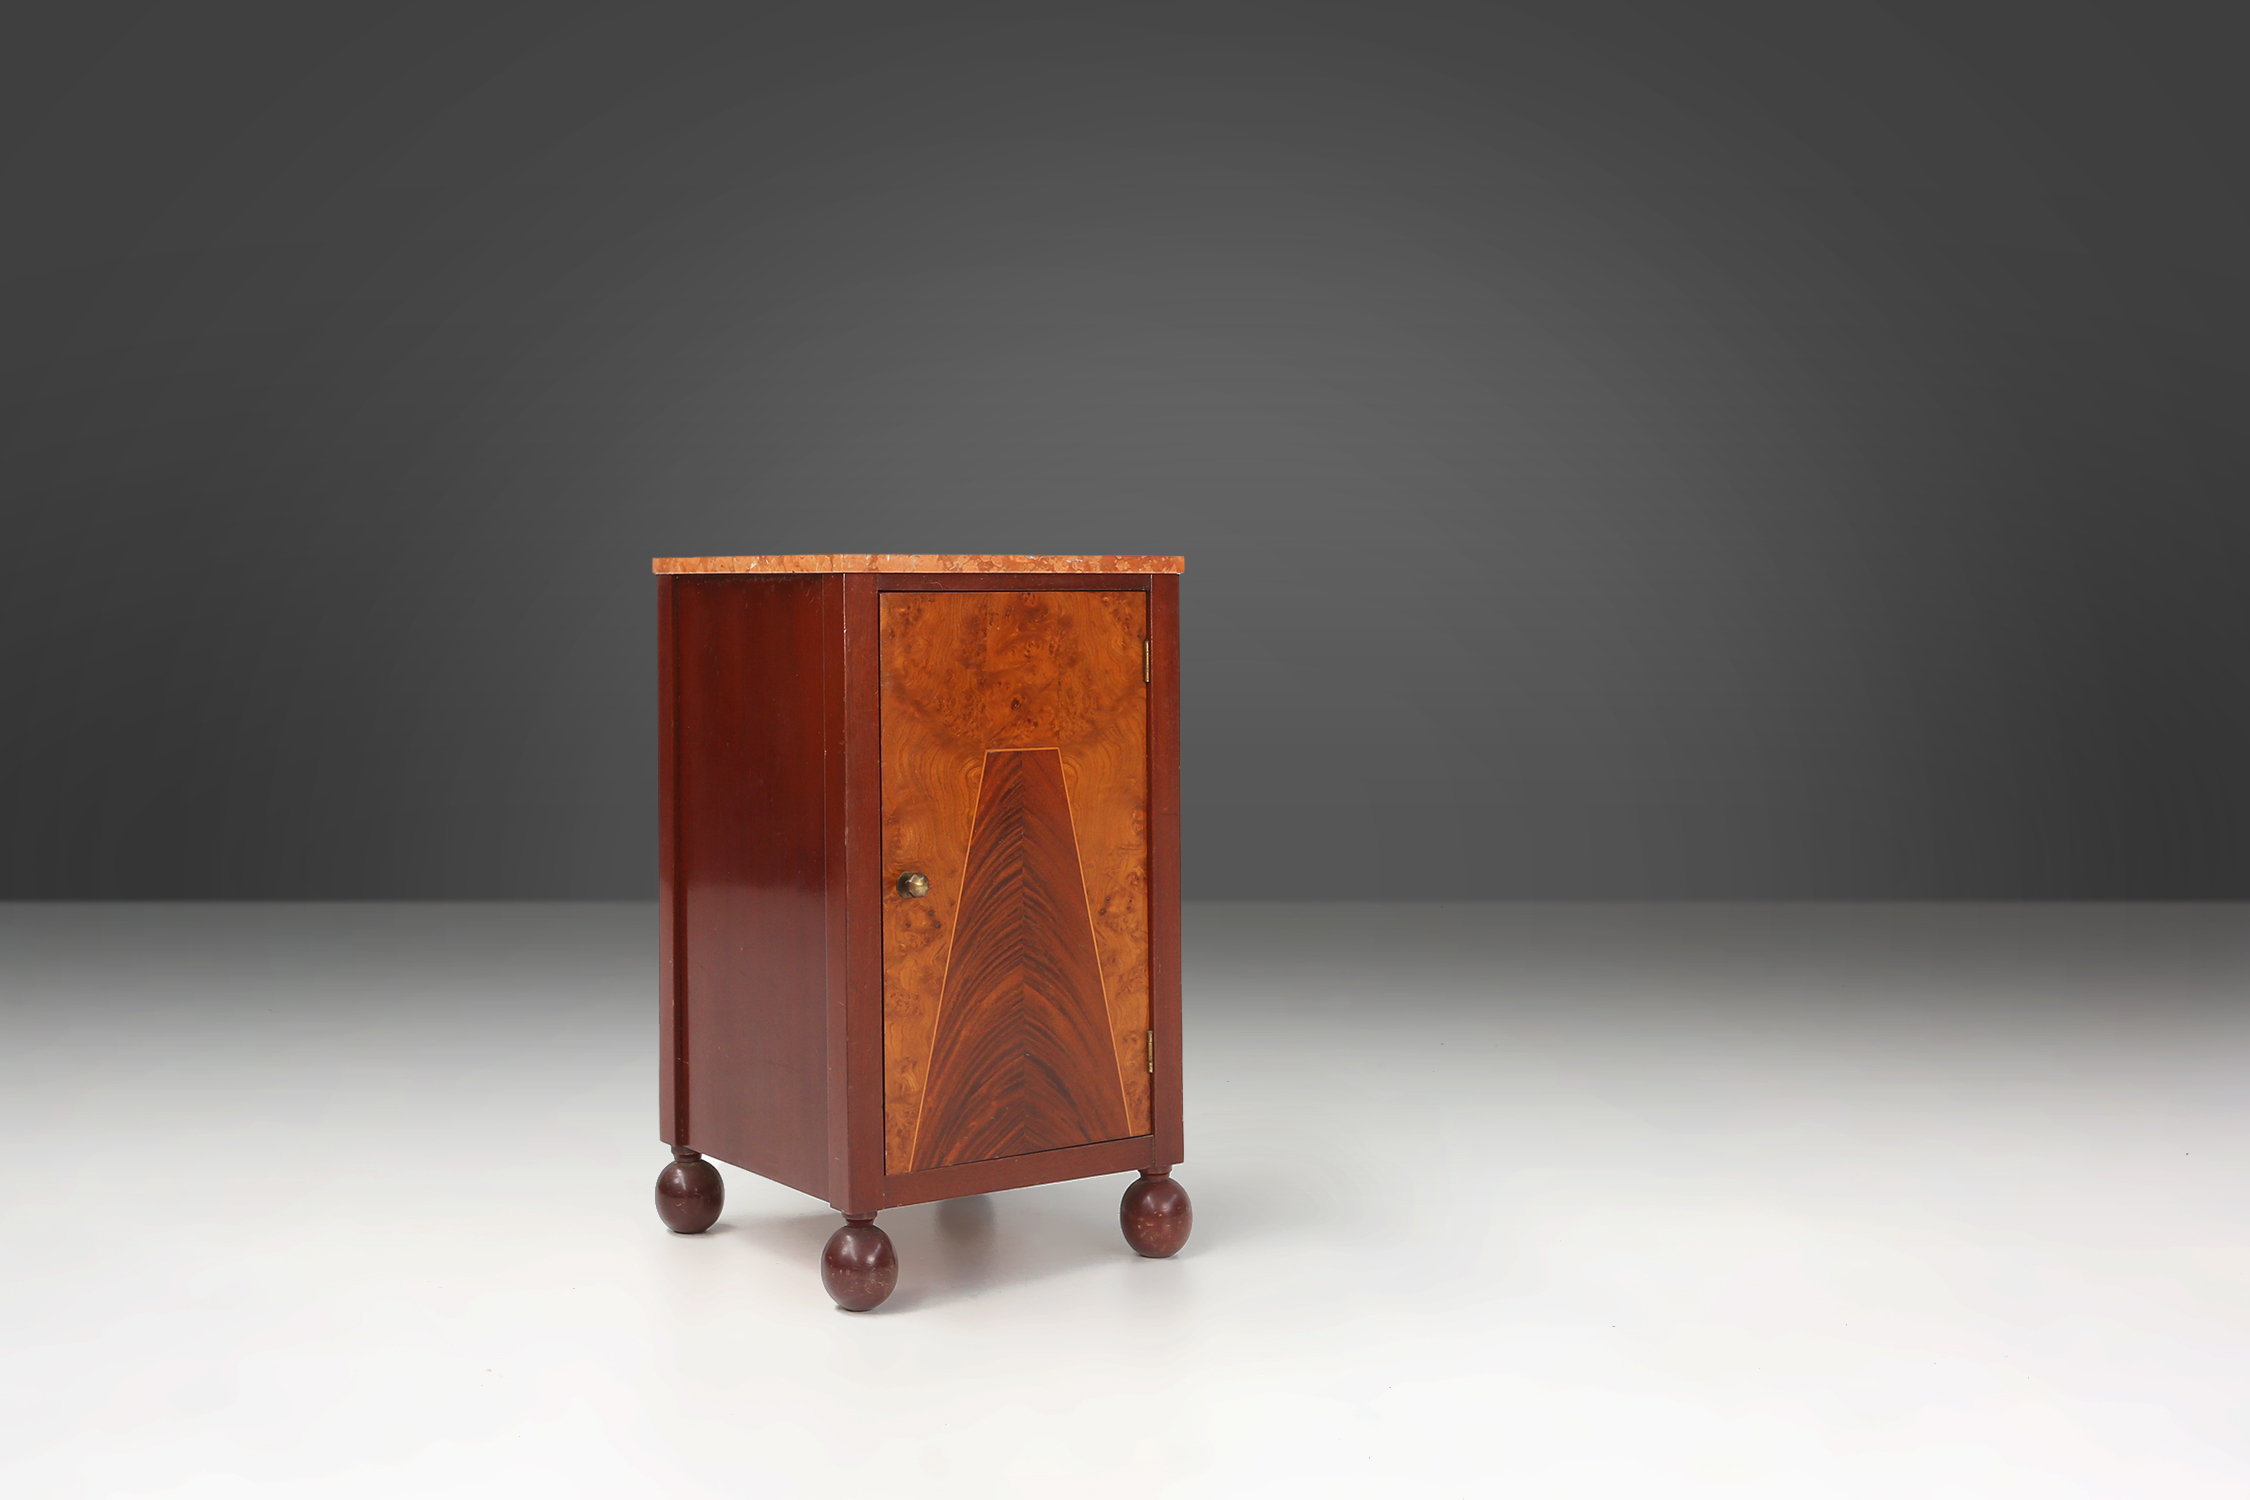 Art Deco nightstand with geometrical wooden inlay and marble top, France, 1930sthumbnail